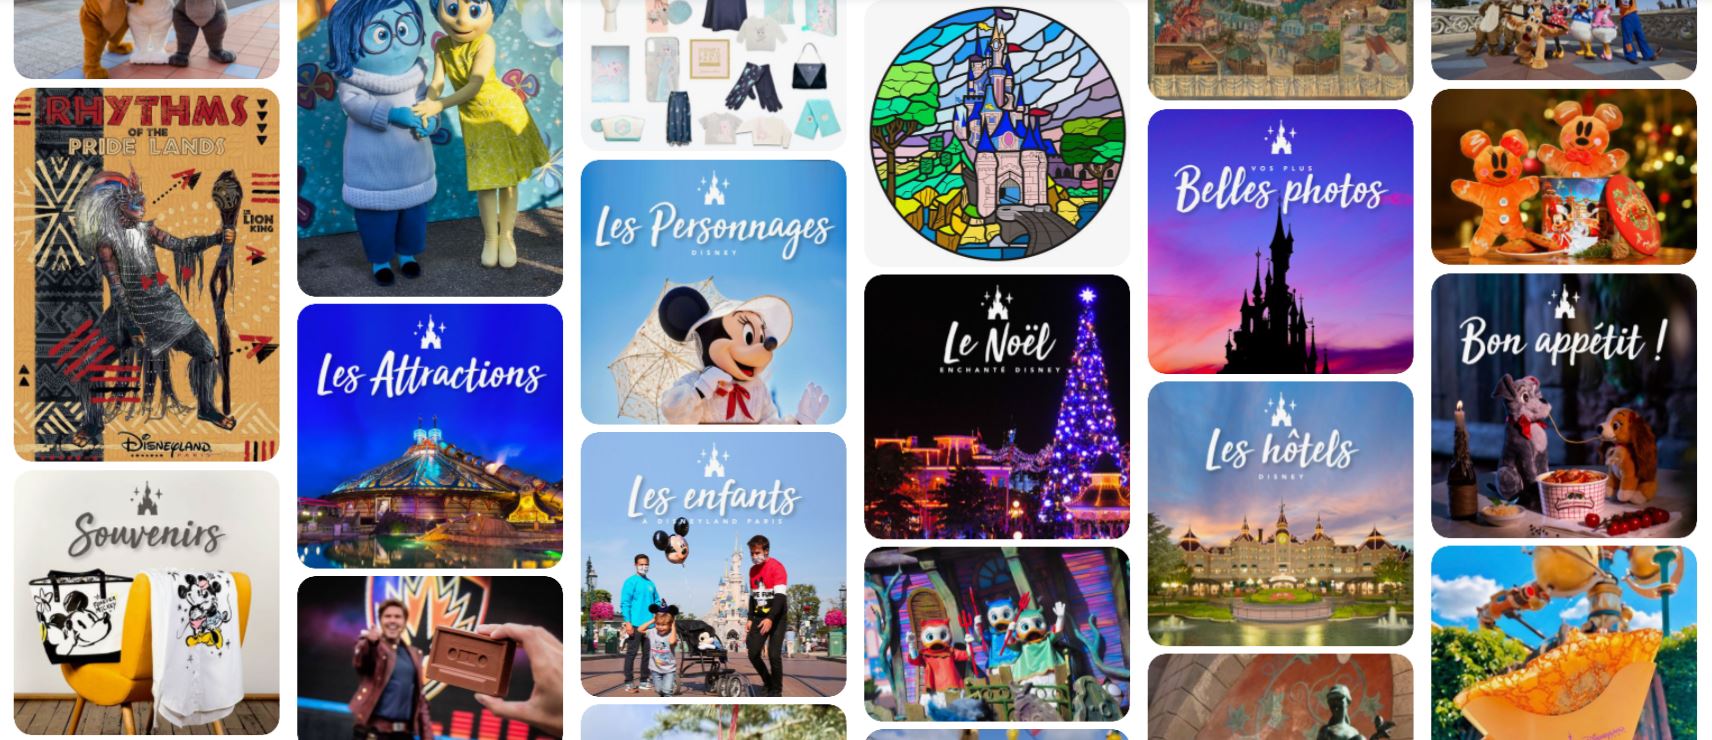 The first boards, such as Art, Characters, Christmas, Halloween and Hotels - just to name a few – are now online. In the coming weeks and months, new pins and boards will be added, filled with park attractions, food, merchandise, travel tips, as well as other surprises. 